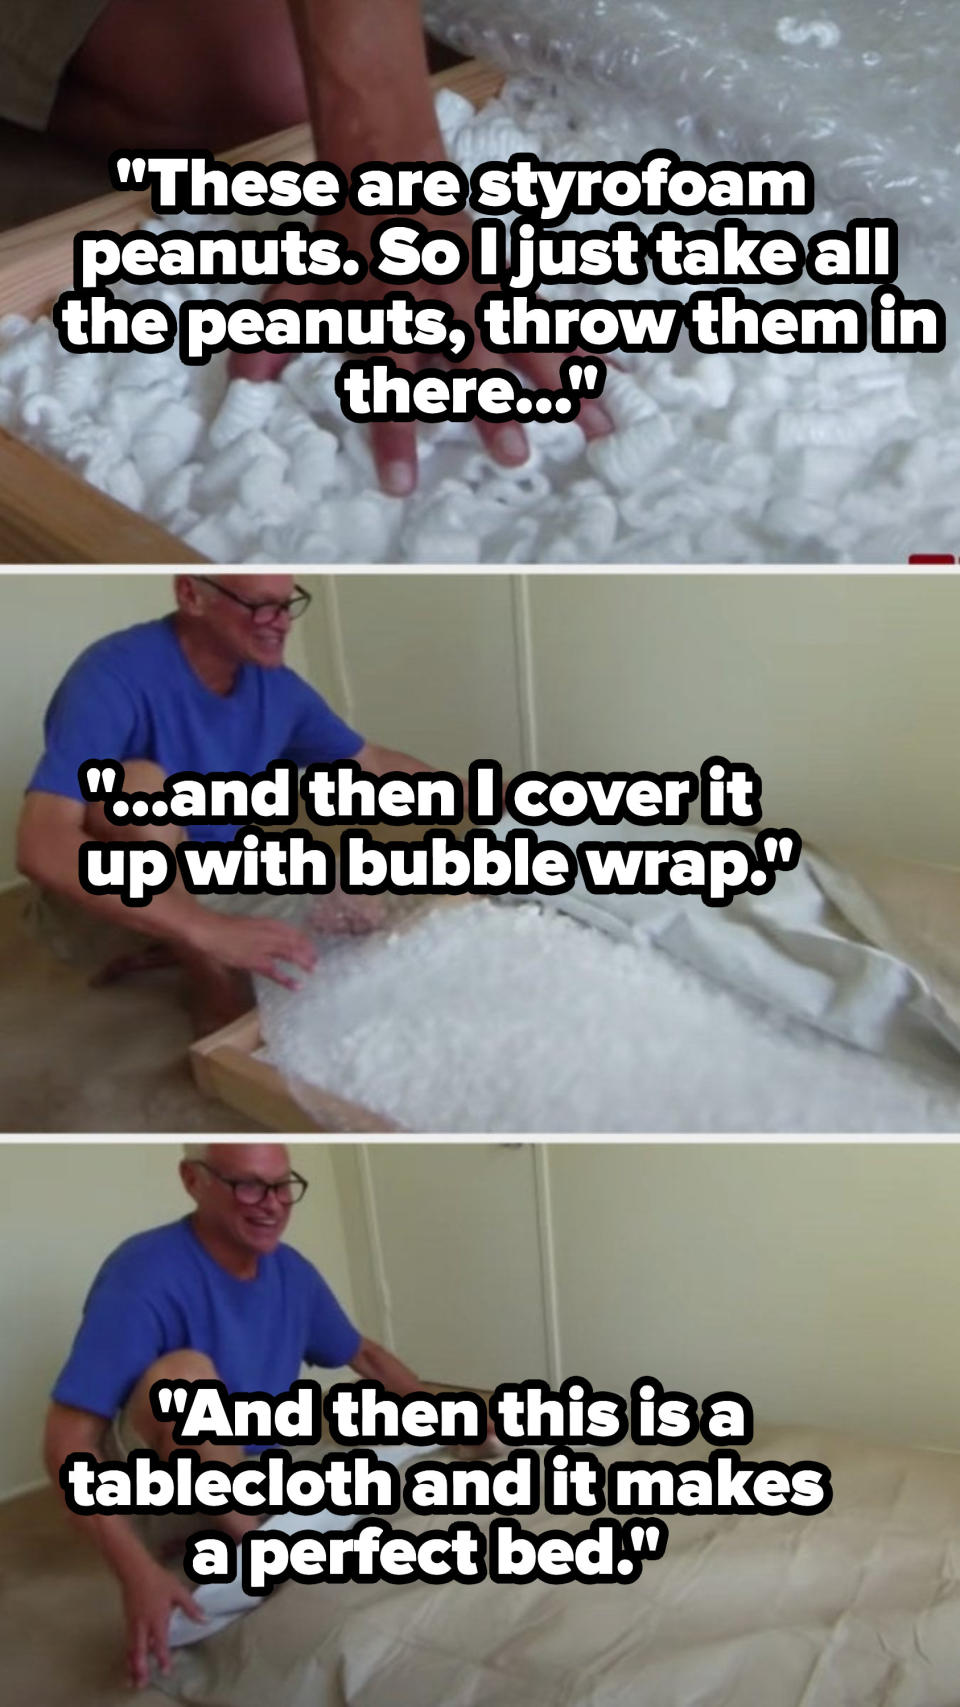 A man using styrofoam, bubble wrap, and tablecloth to make a bed